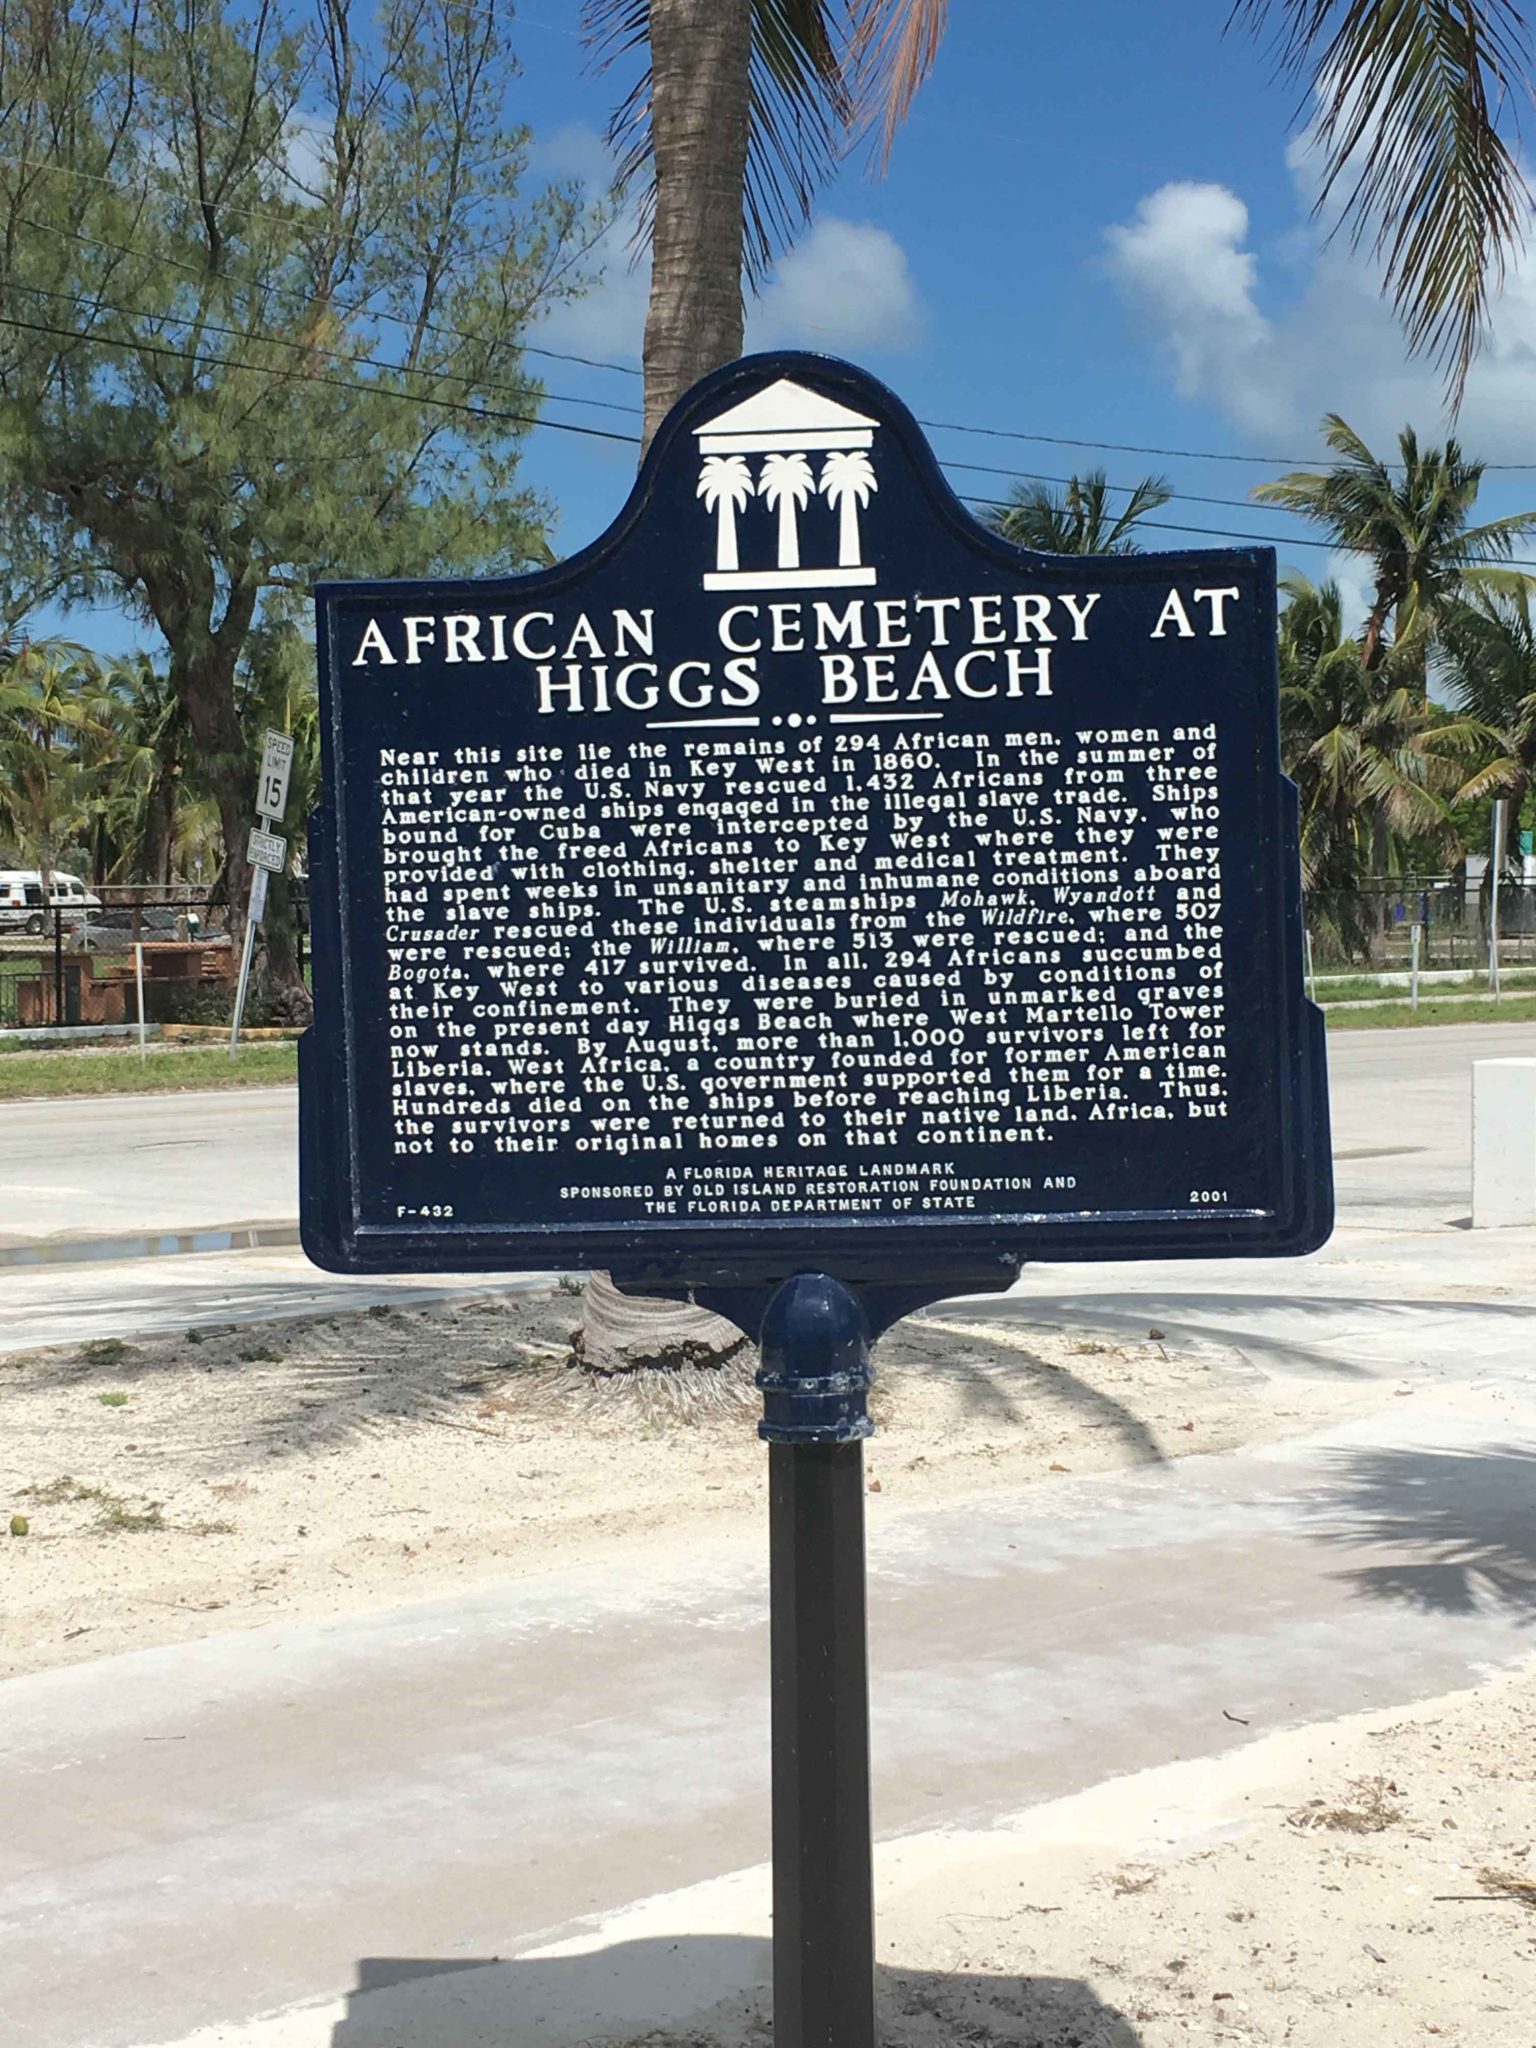 African Cemetery at Higgs Beach – Historic Walking Tour